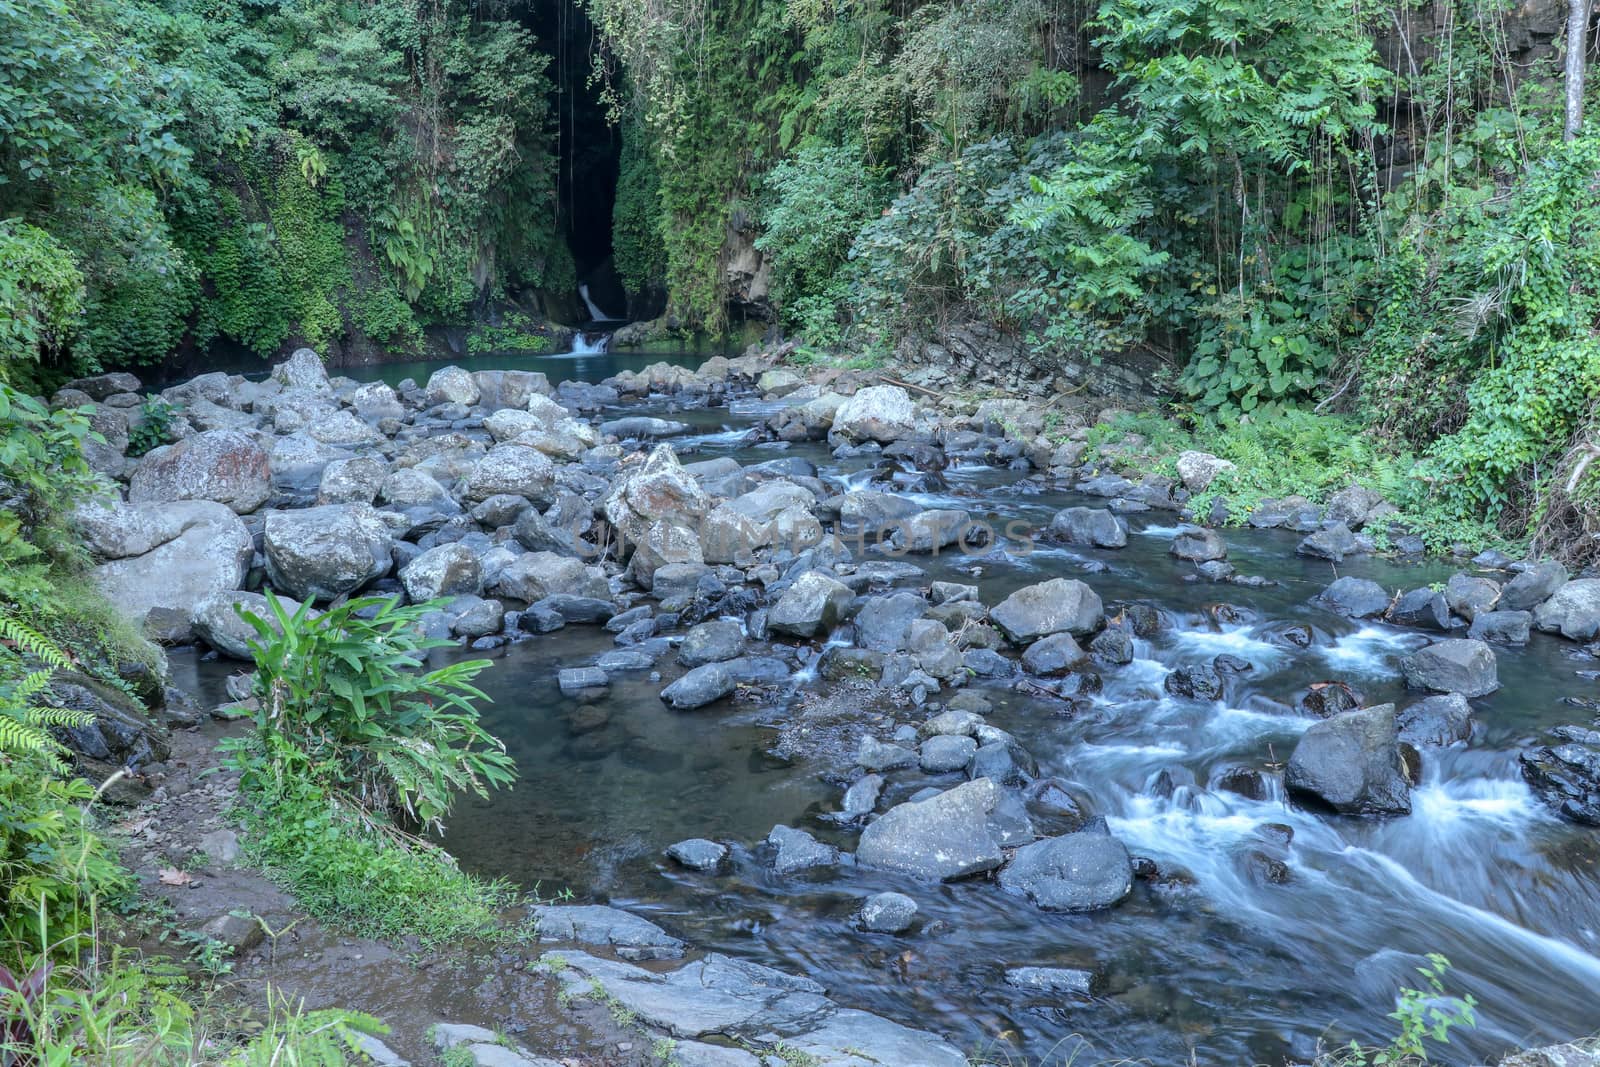 Mountain river bed with many boulders rising above the surface. Wild tropical jungle lining a river bed. Natural place.